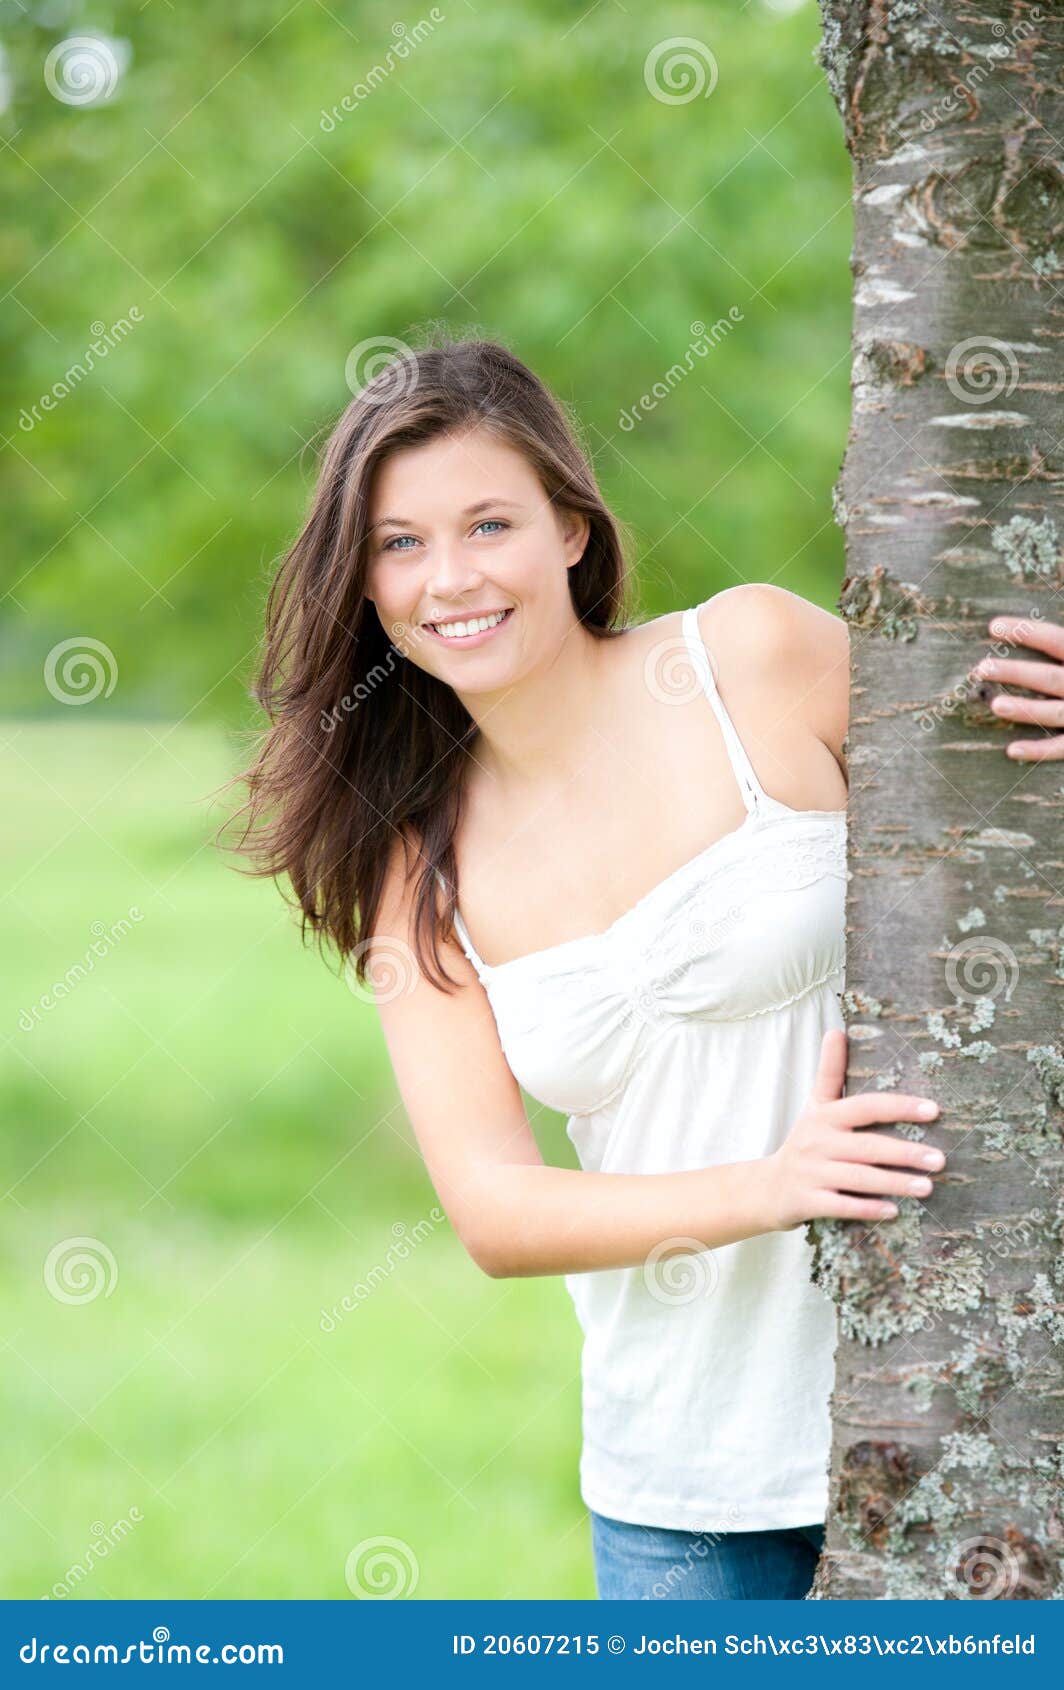 Outdoor Portrait Of A Cute Teen Stock Image Image